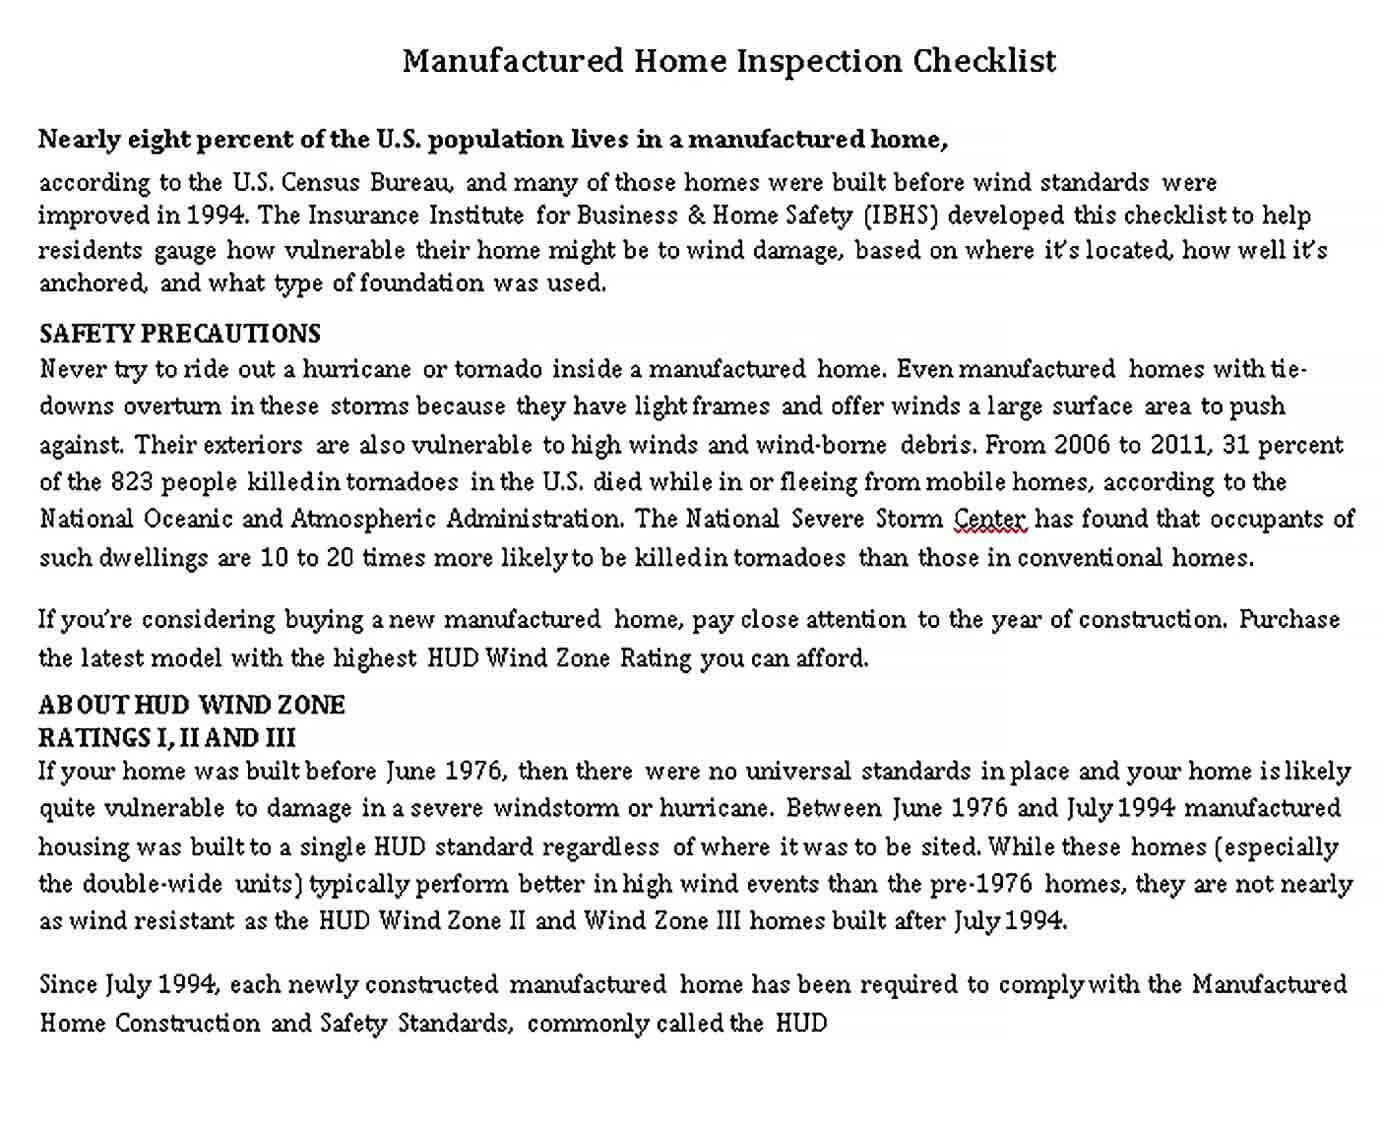 Sample Manufactured Home Inspection Checklist Template